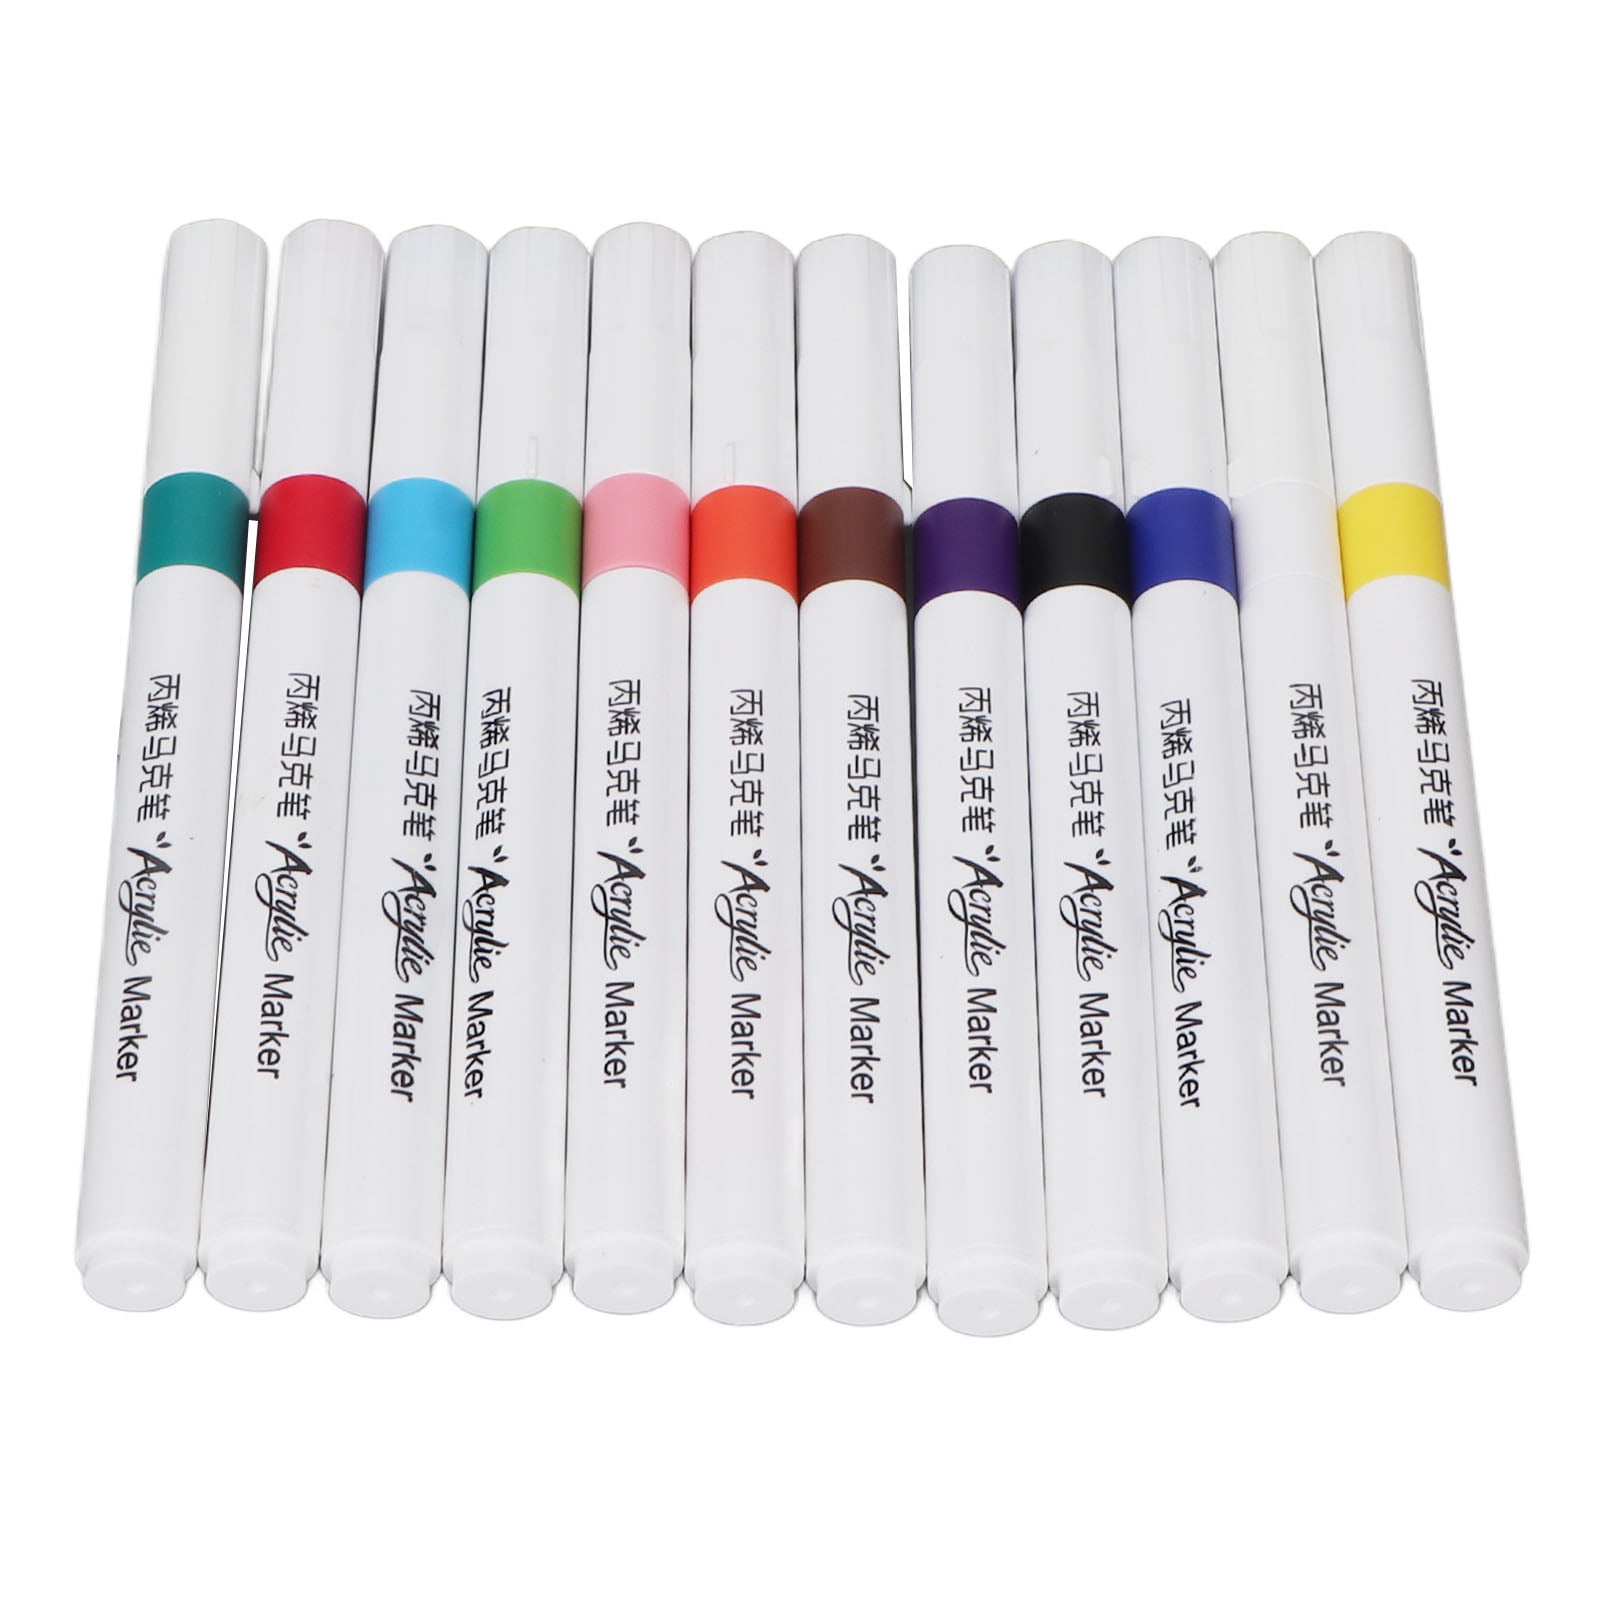 Art Acrylic Paint Pens, 46 Acrylic Paint Markers, Extra Fine Tip Paint Pens  (0.7mm), Great for Rock Painting, Wood, Canvas, Ceramic, Fabric, Glass, Age  5+ Year, Adult 